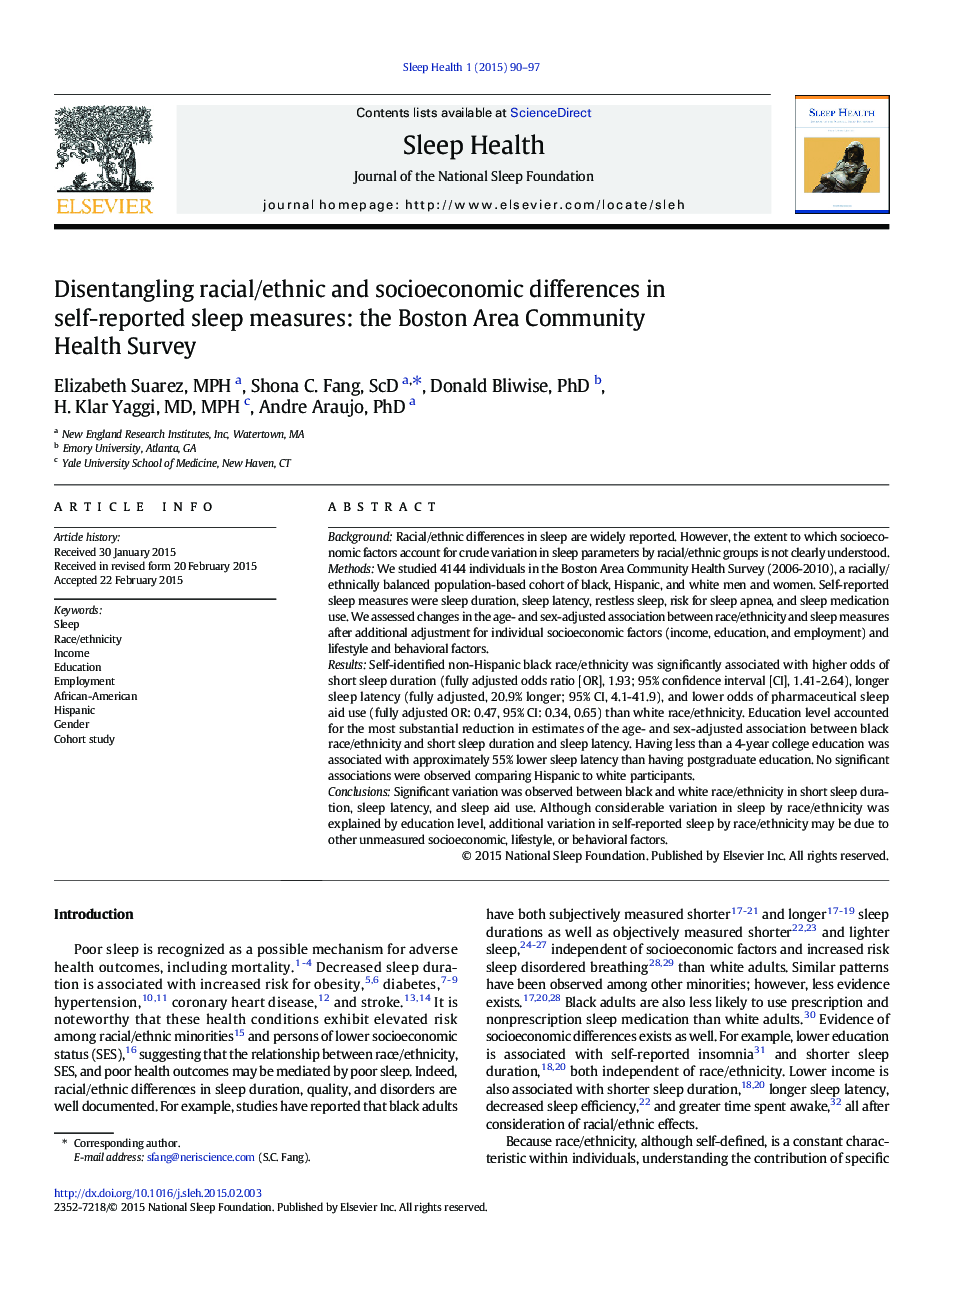 Disentangling racial/ethnic and socioeconomic differences in self-reported sleep measures: the Boston Area Community Health Survey